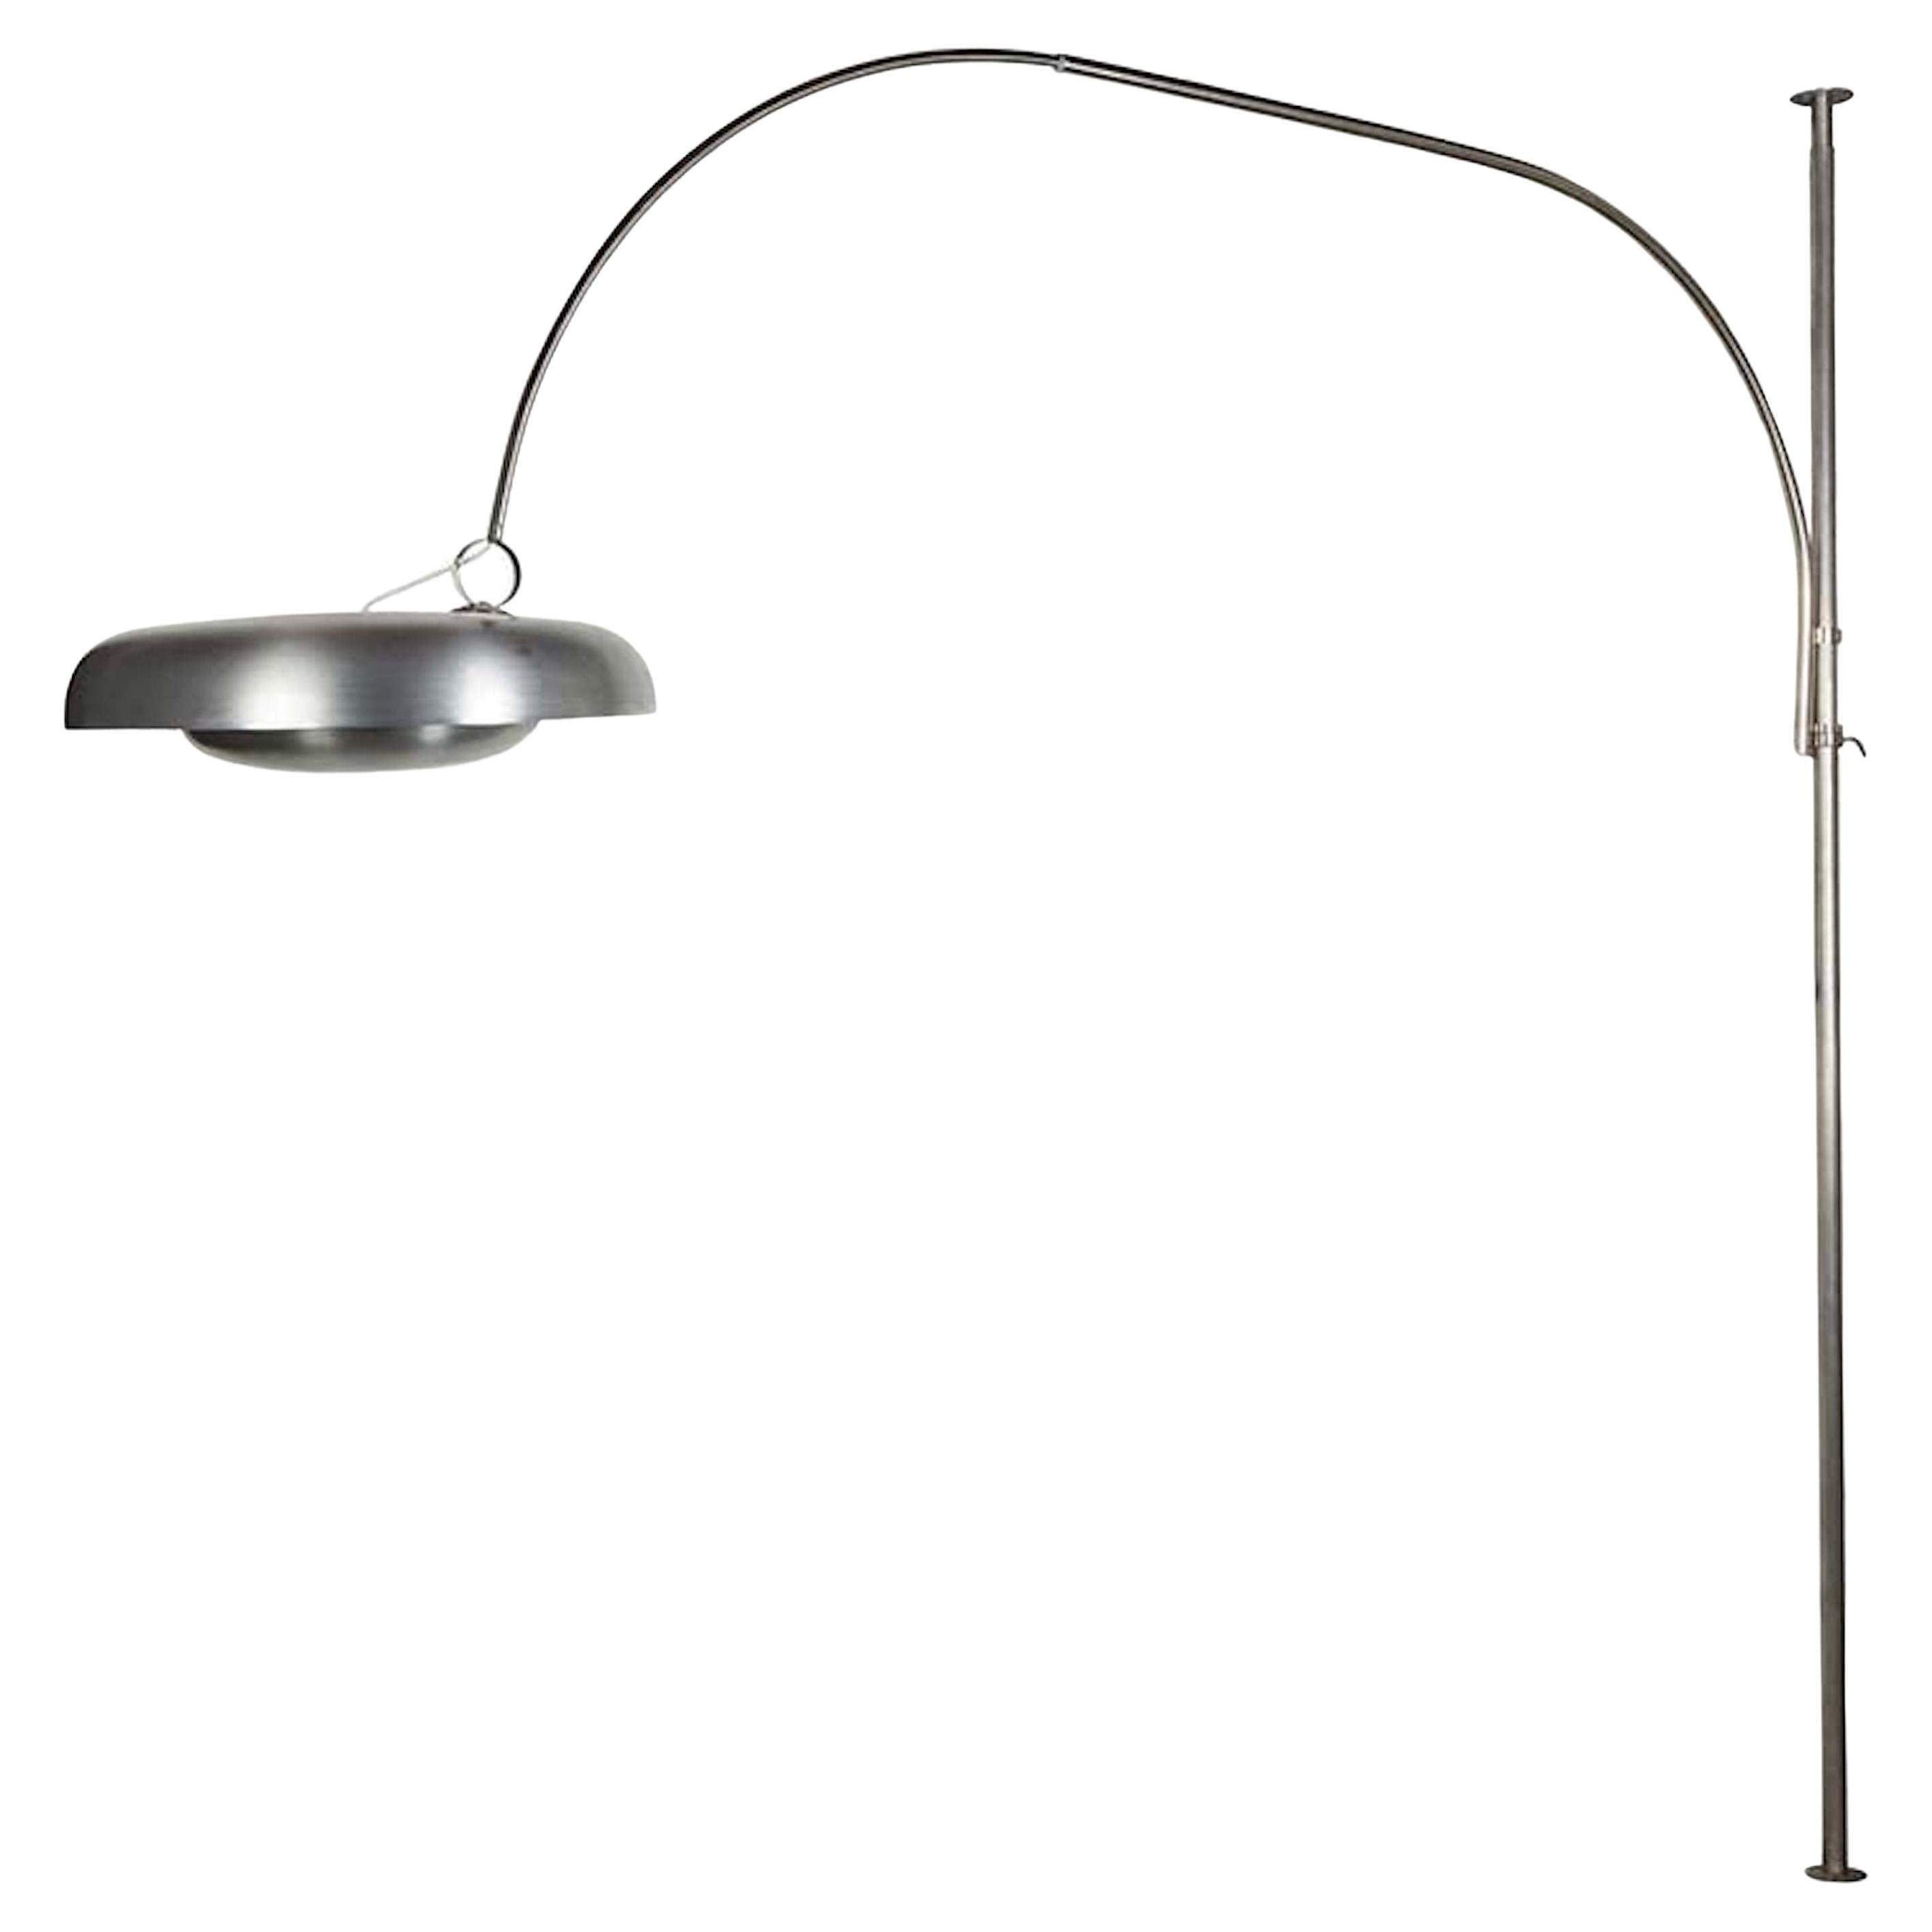 Adjustable height lamp "PR" by Pirro Cuniberti for Sirrah, Itali, 1970s For Sale